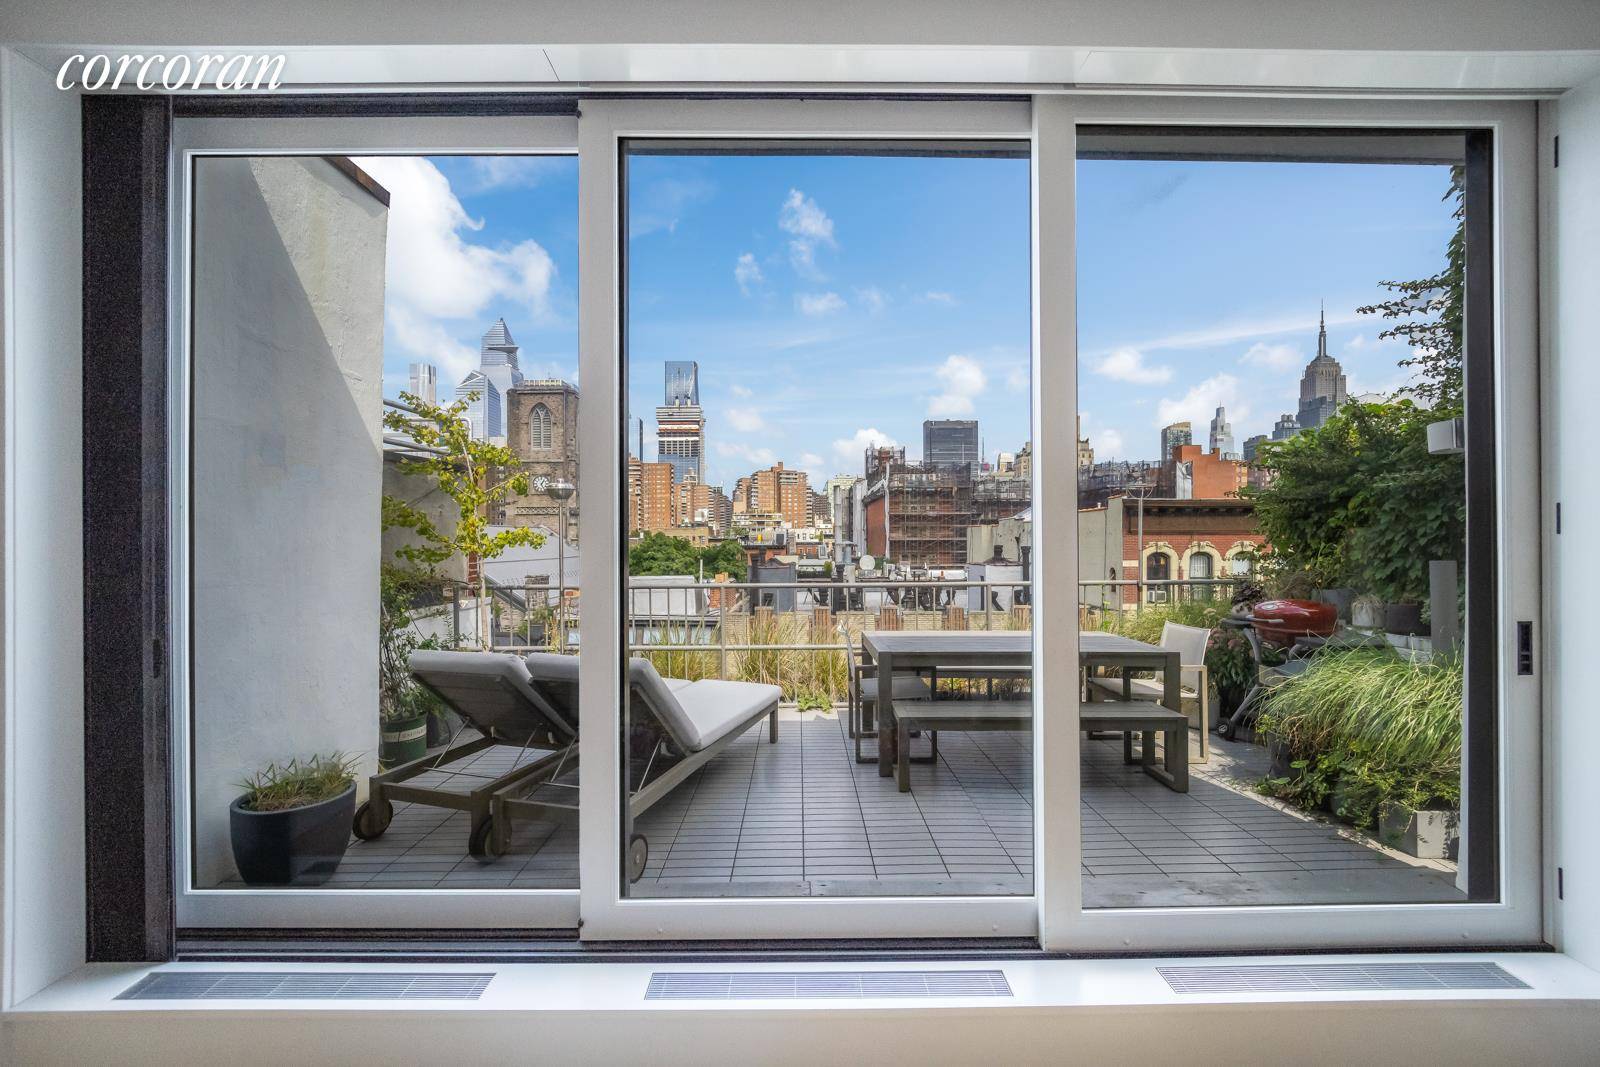 This fantastic Chelsea triplex penthouse has light, views, space, a beautiful private terrace and just underwent a complete, meticulous, and tasteful renovation.